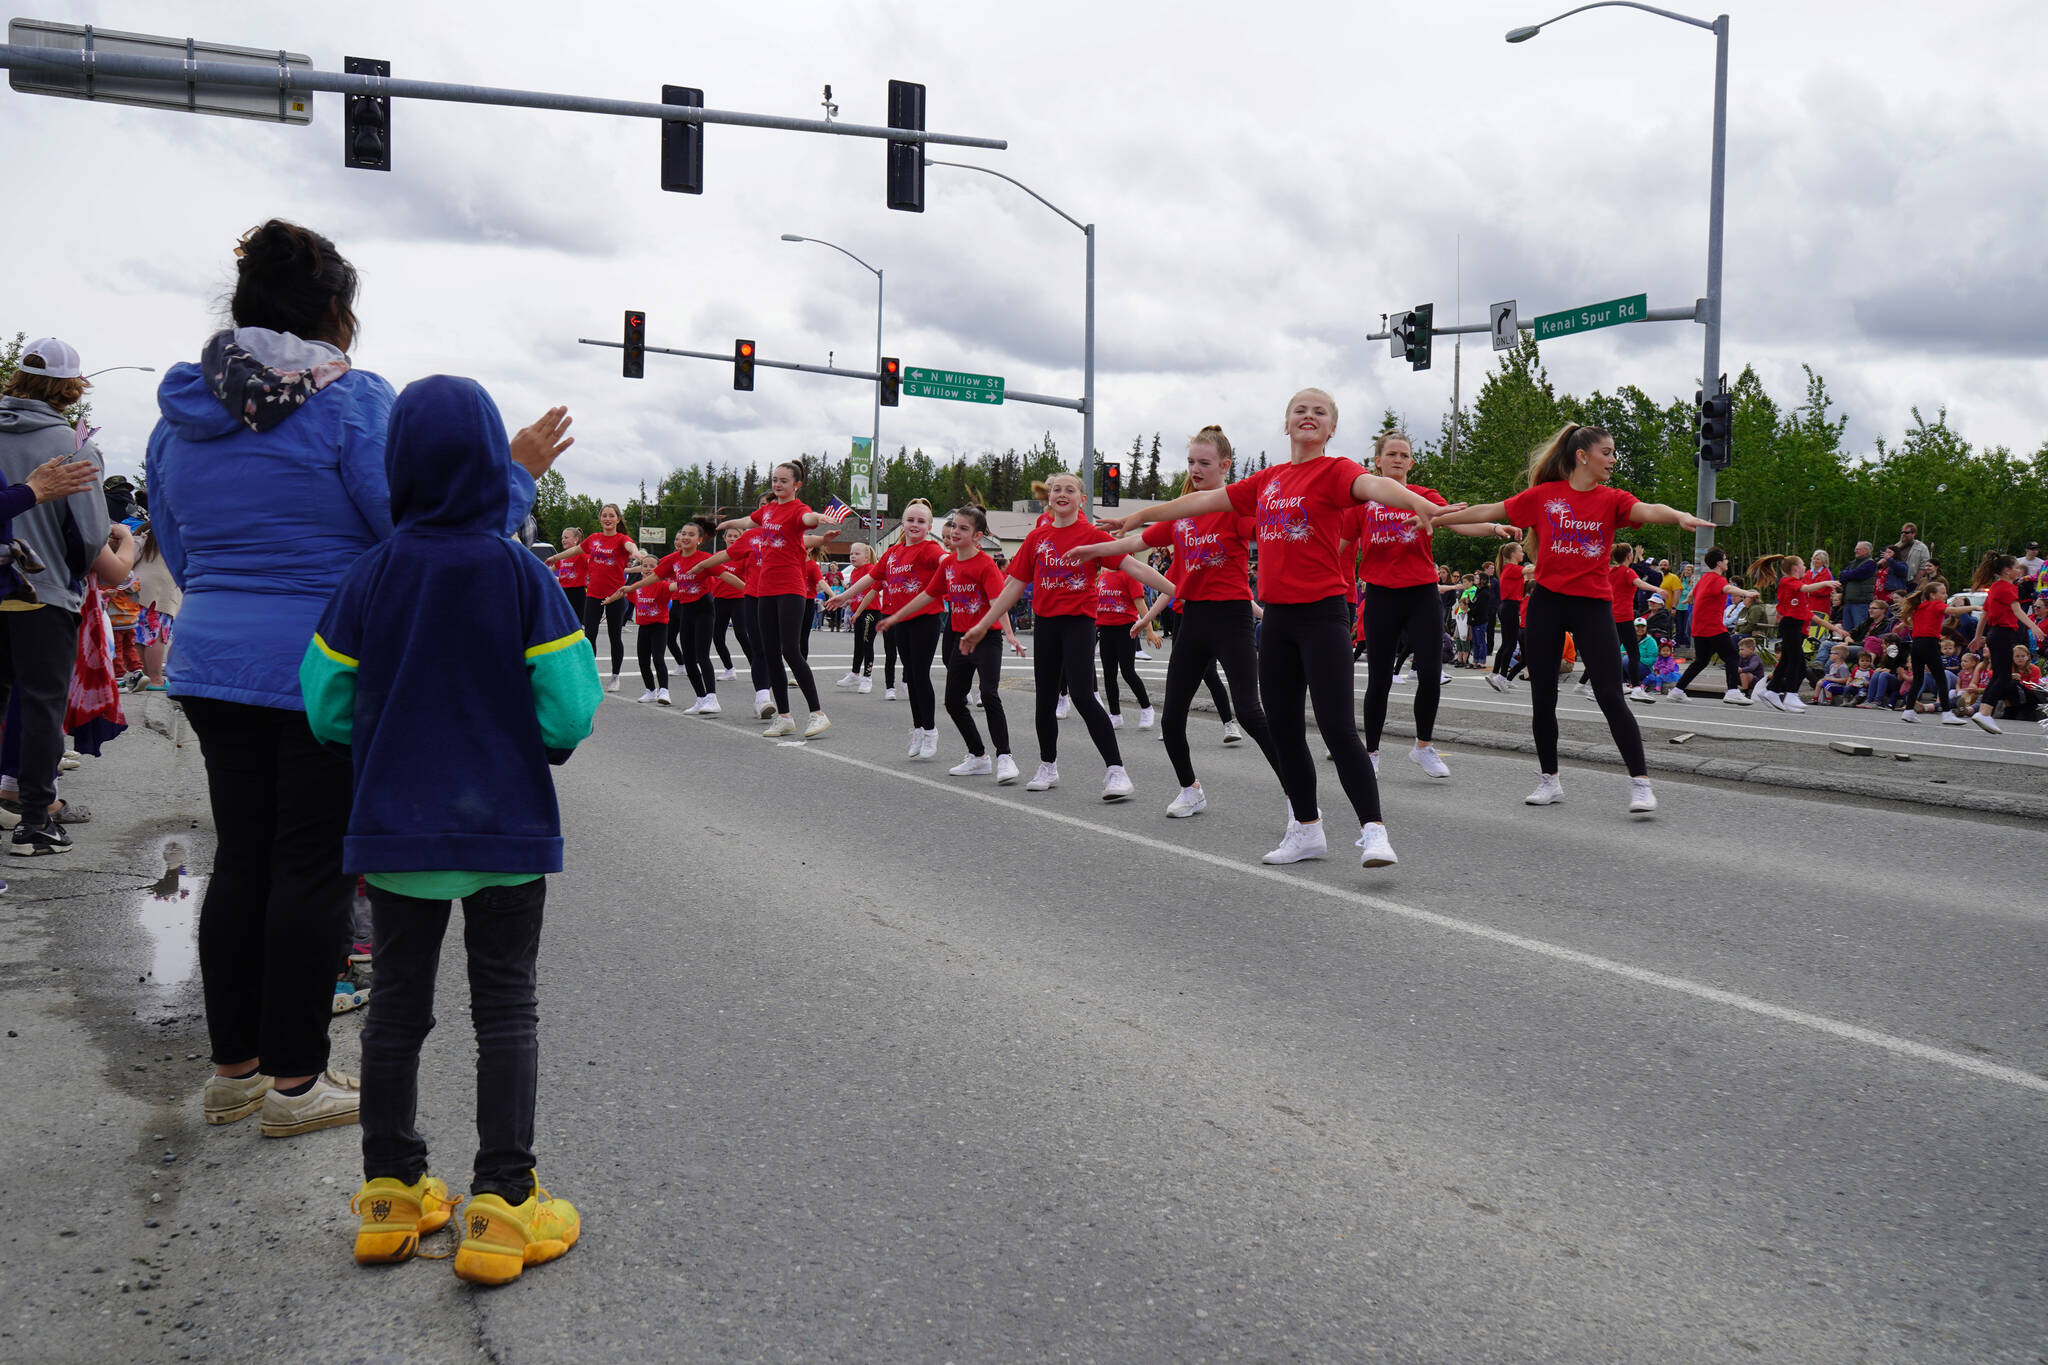 Forever Dance students perform a routine as the Fourth of July Parade moves down the Kenai Spur Highway in Kenai, Alaska on Tuesday, July 4, 2023. (Jake Dye/Peninsula Clarion)